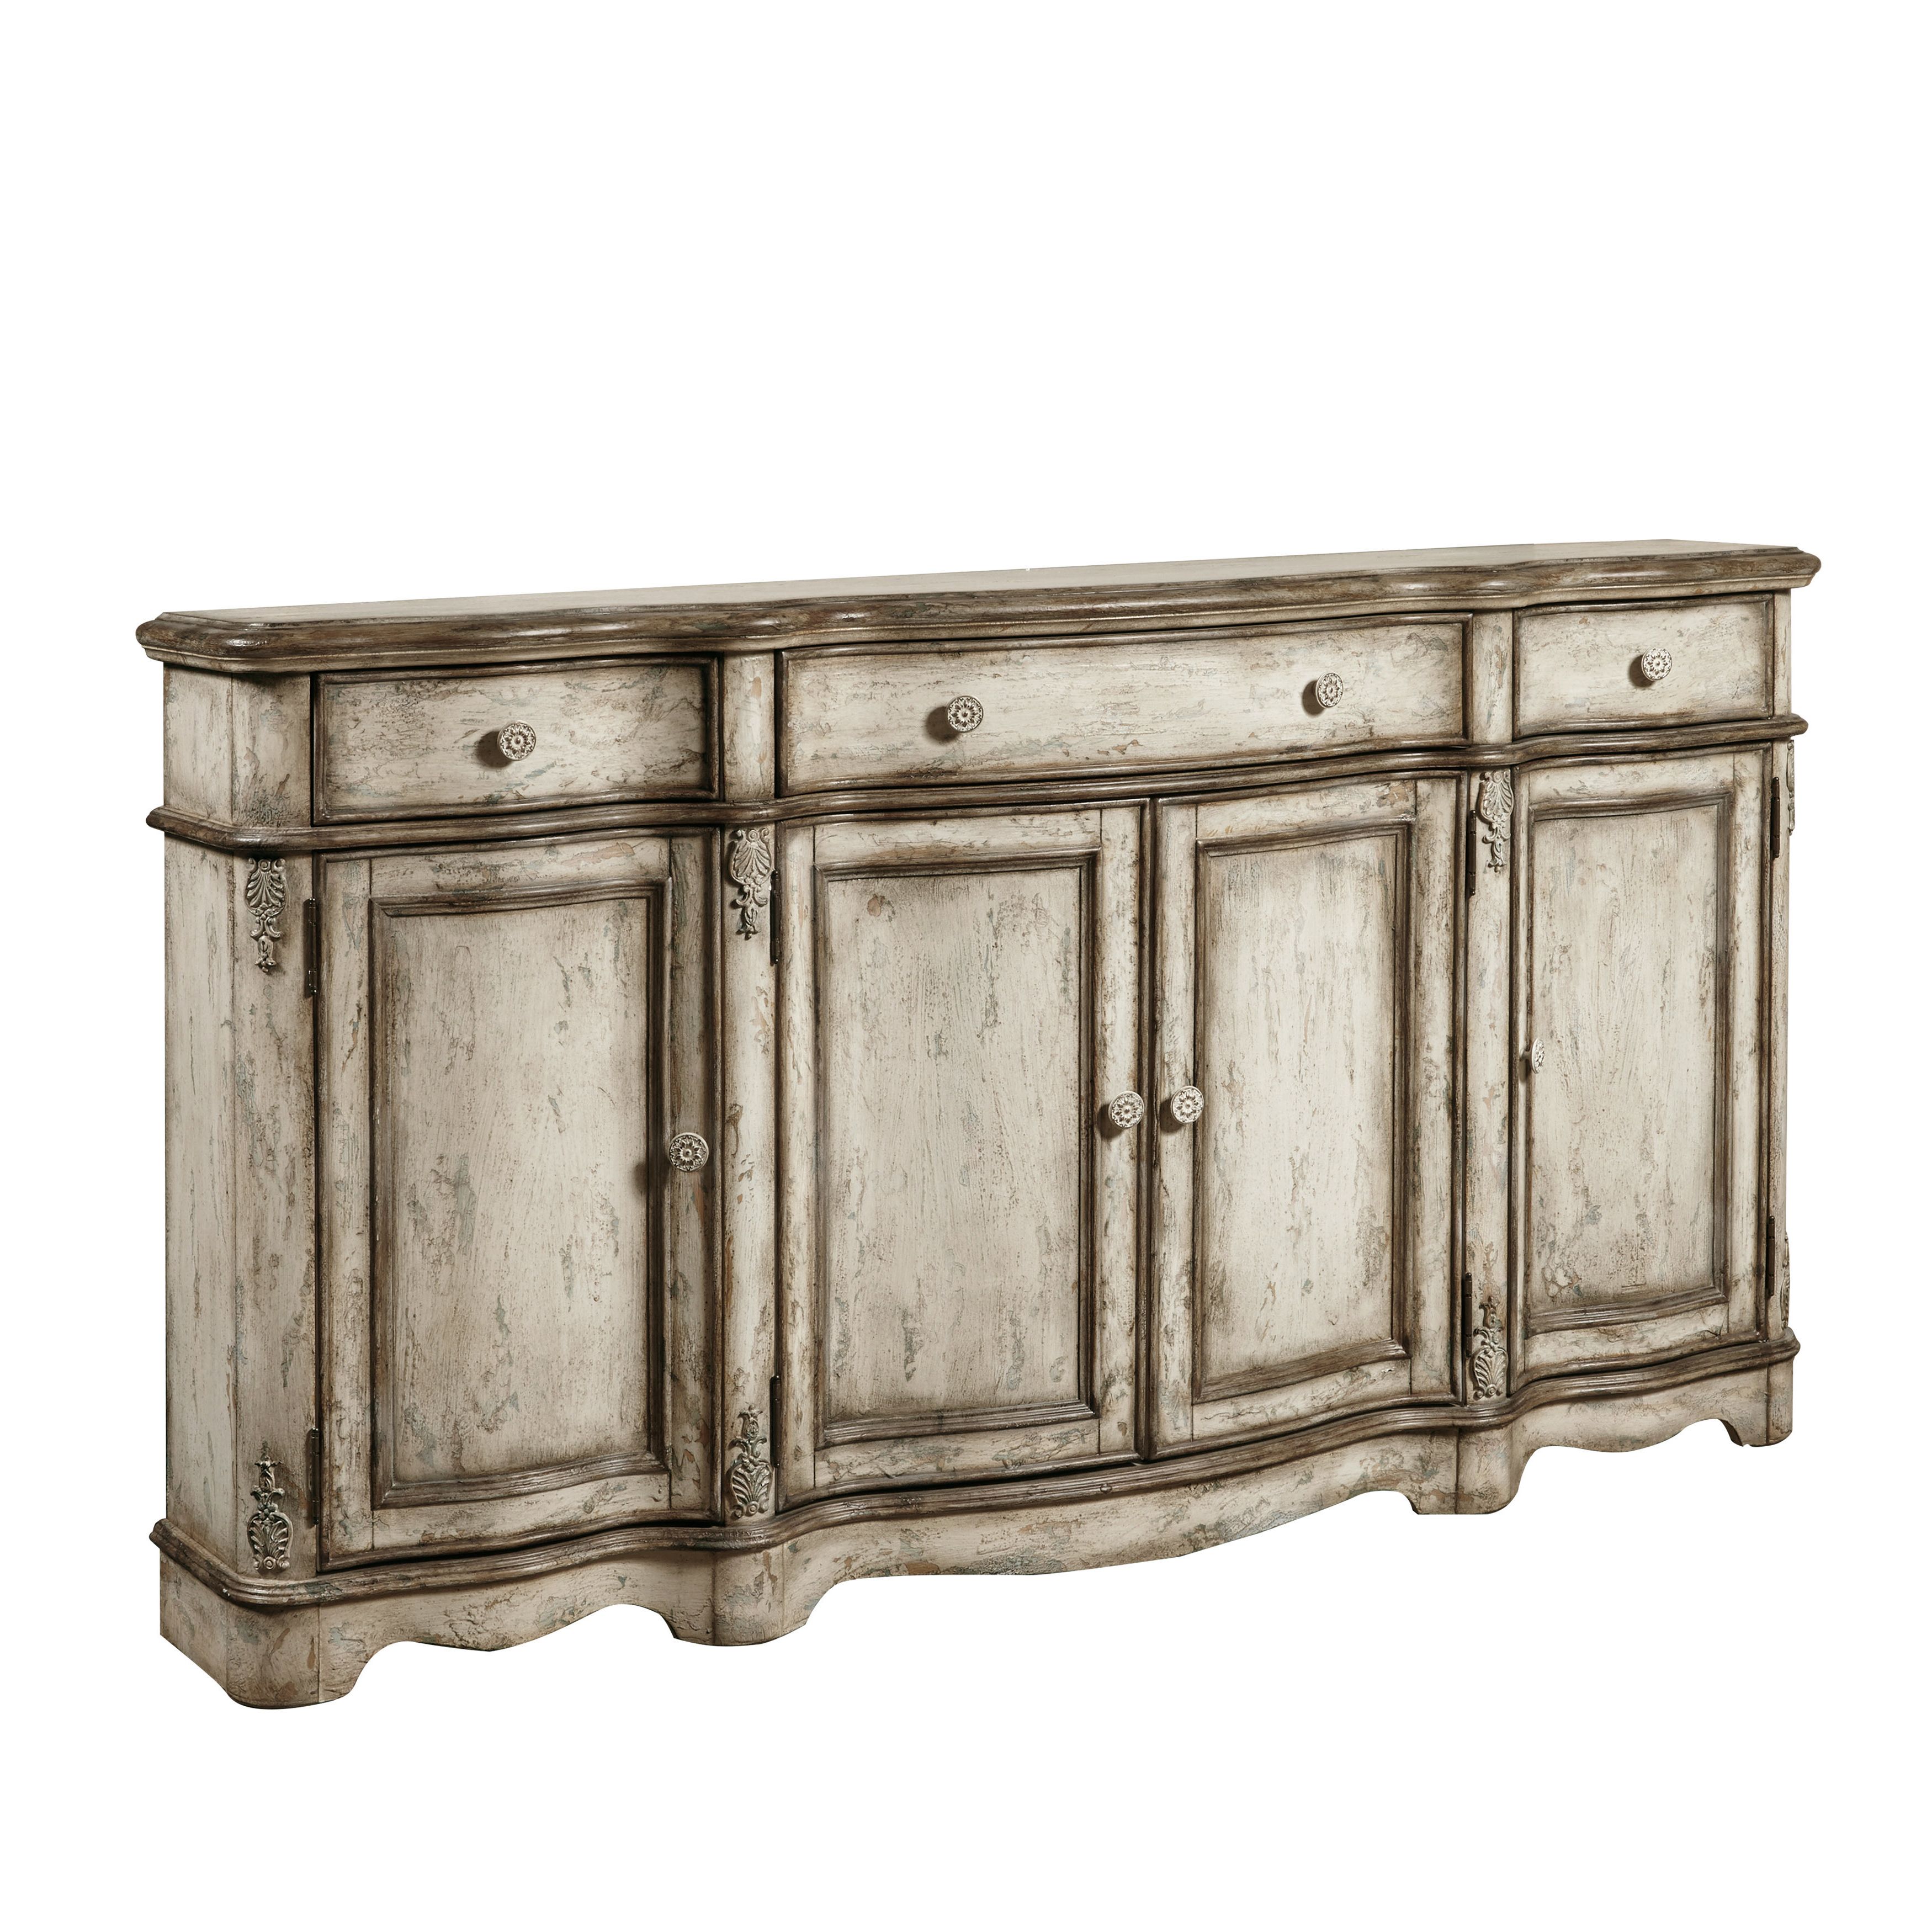 Farmhouse & Rustic Sideboards & Buffets | Birch Lane Throughout Stillwater Sideboards (View 15 of 20)